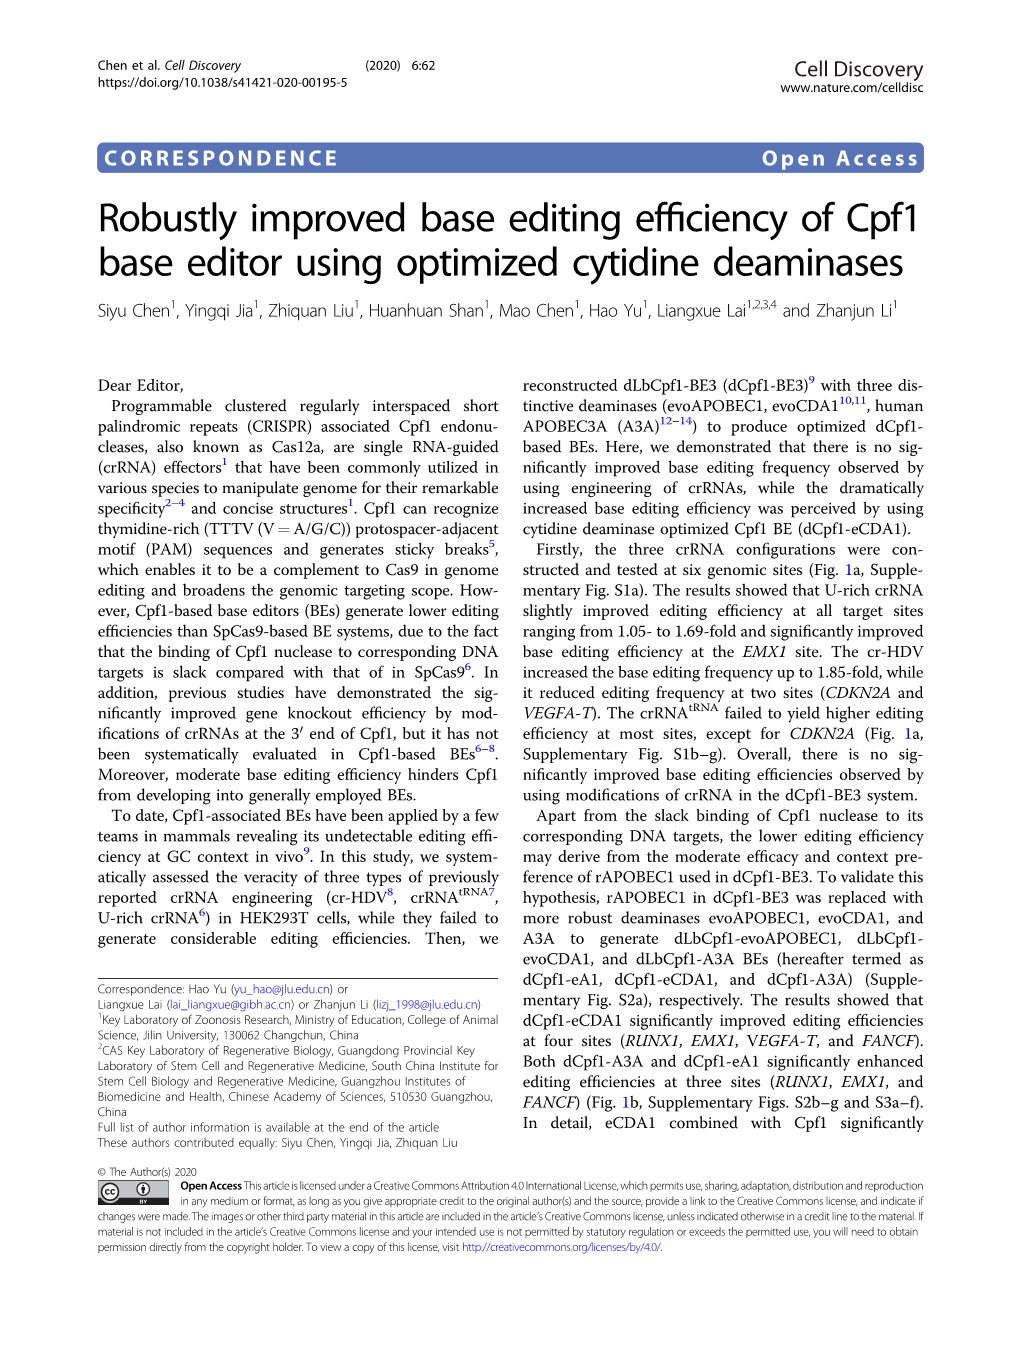 Robustly Improved Base Editing Efficiency of Cpf1 Base Editor Using